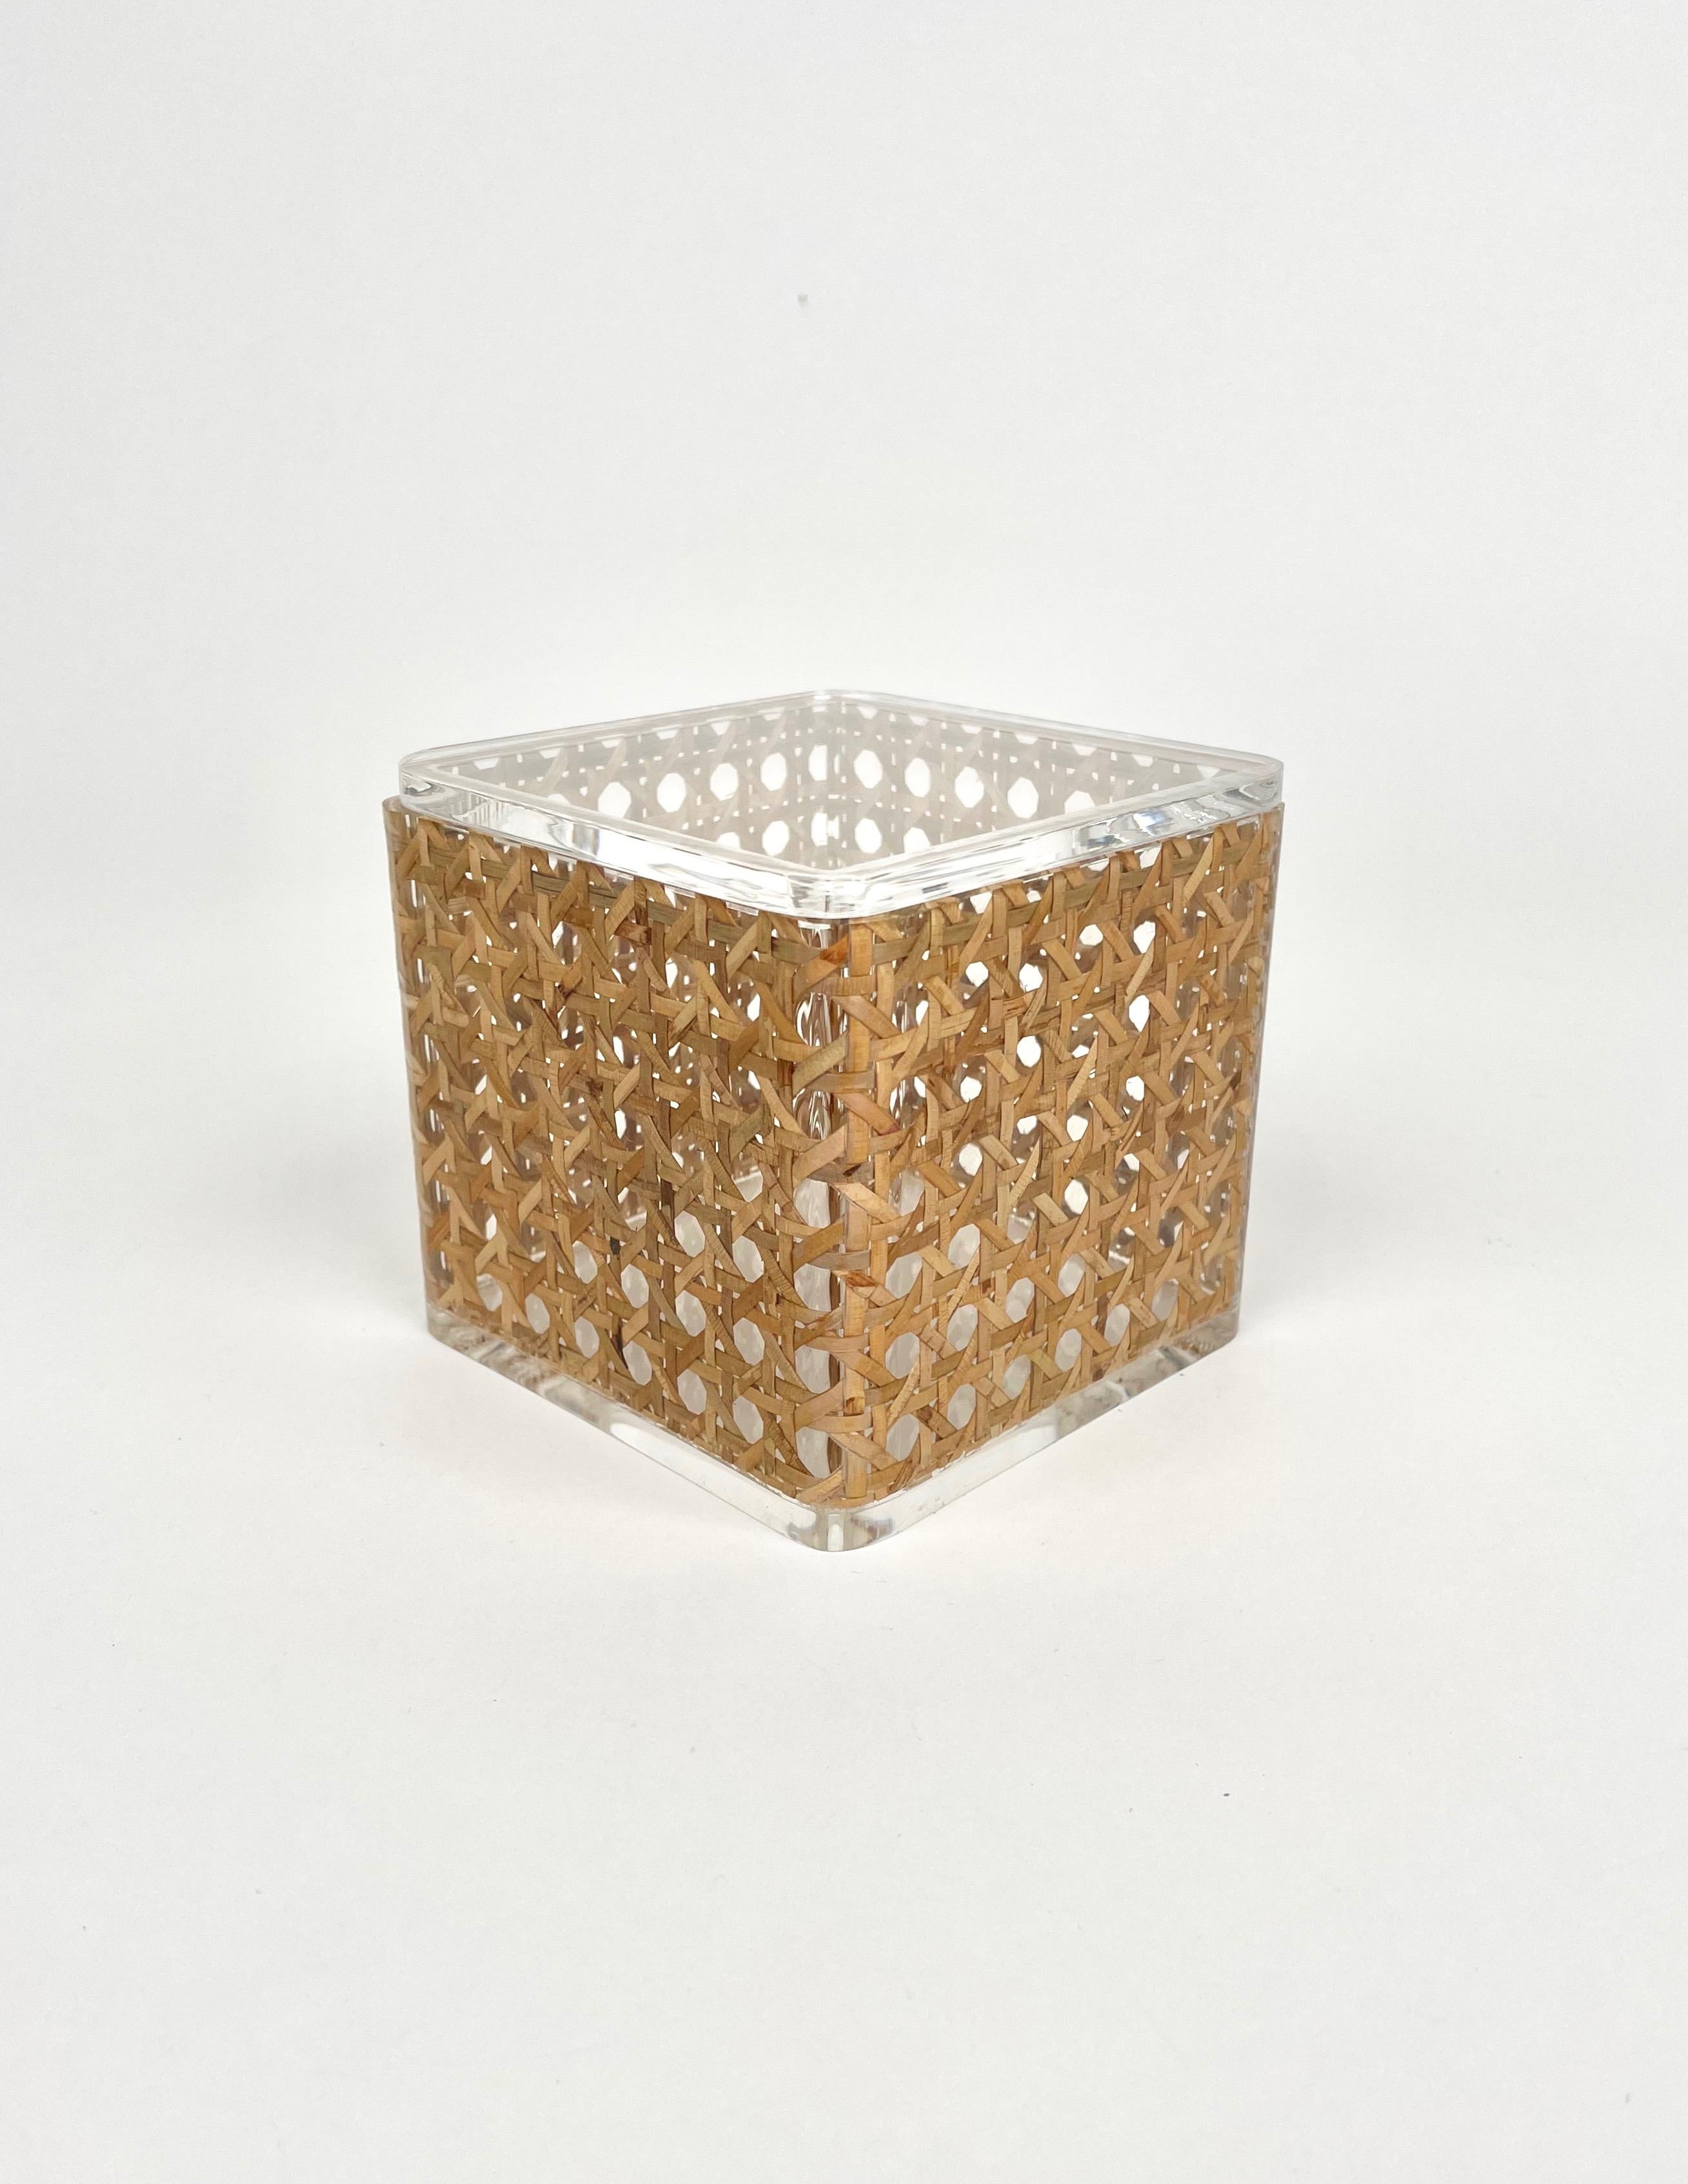 Wicker Pair of Box in Lucite & Rattan Christian Dior Home Style, Italy, 1970s For Sale